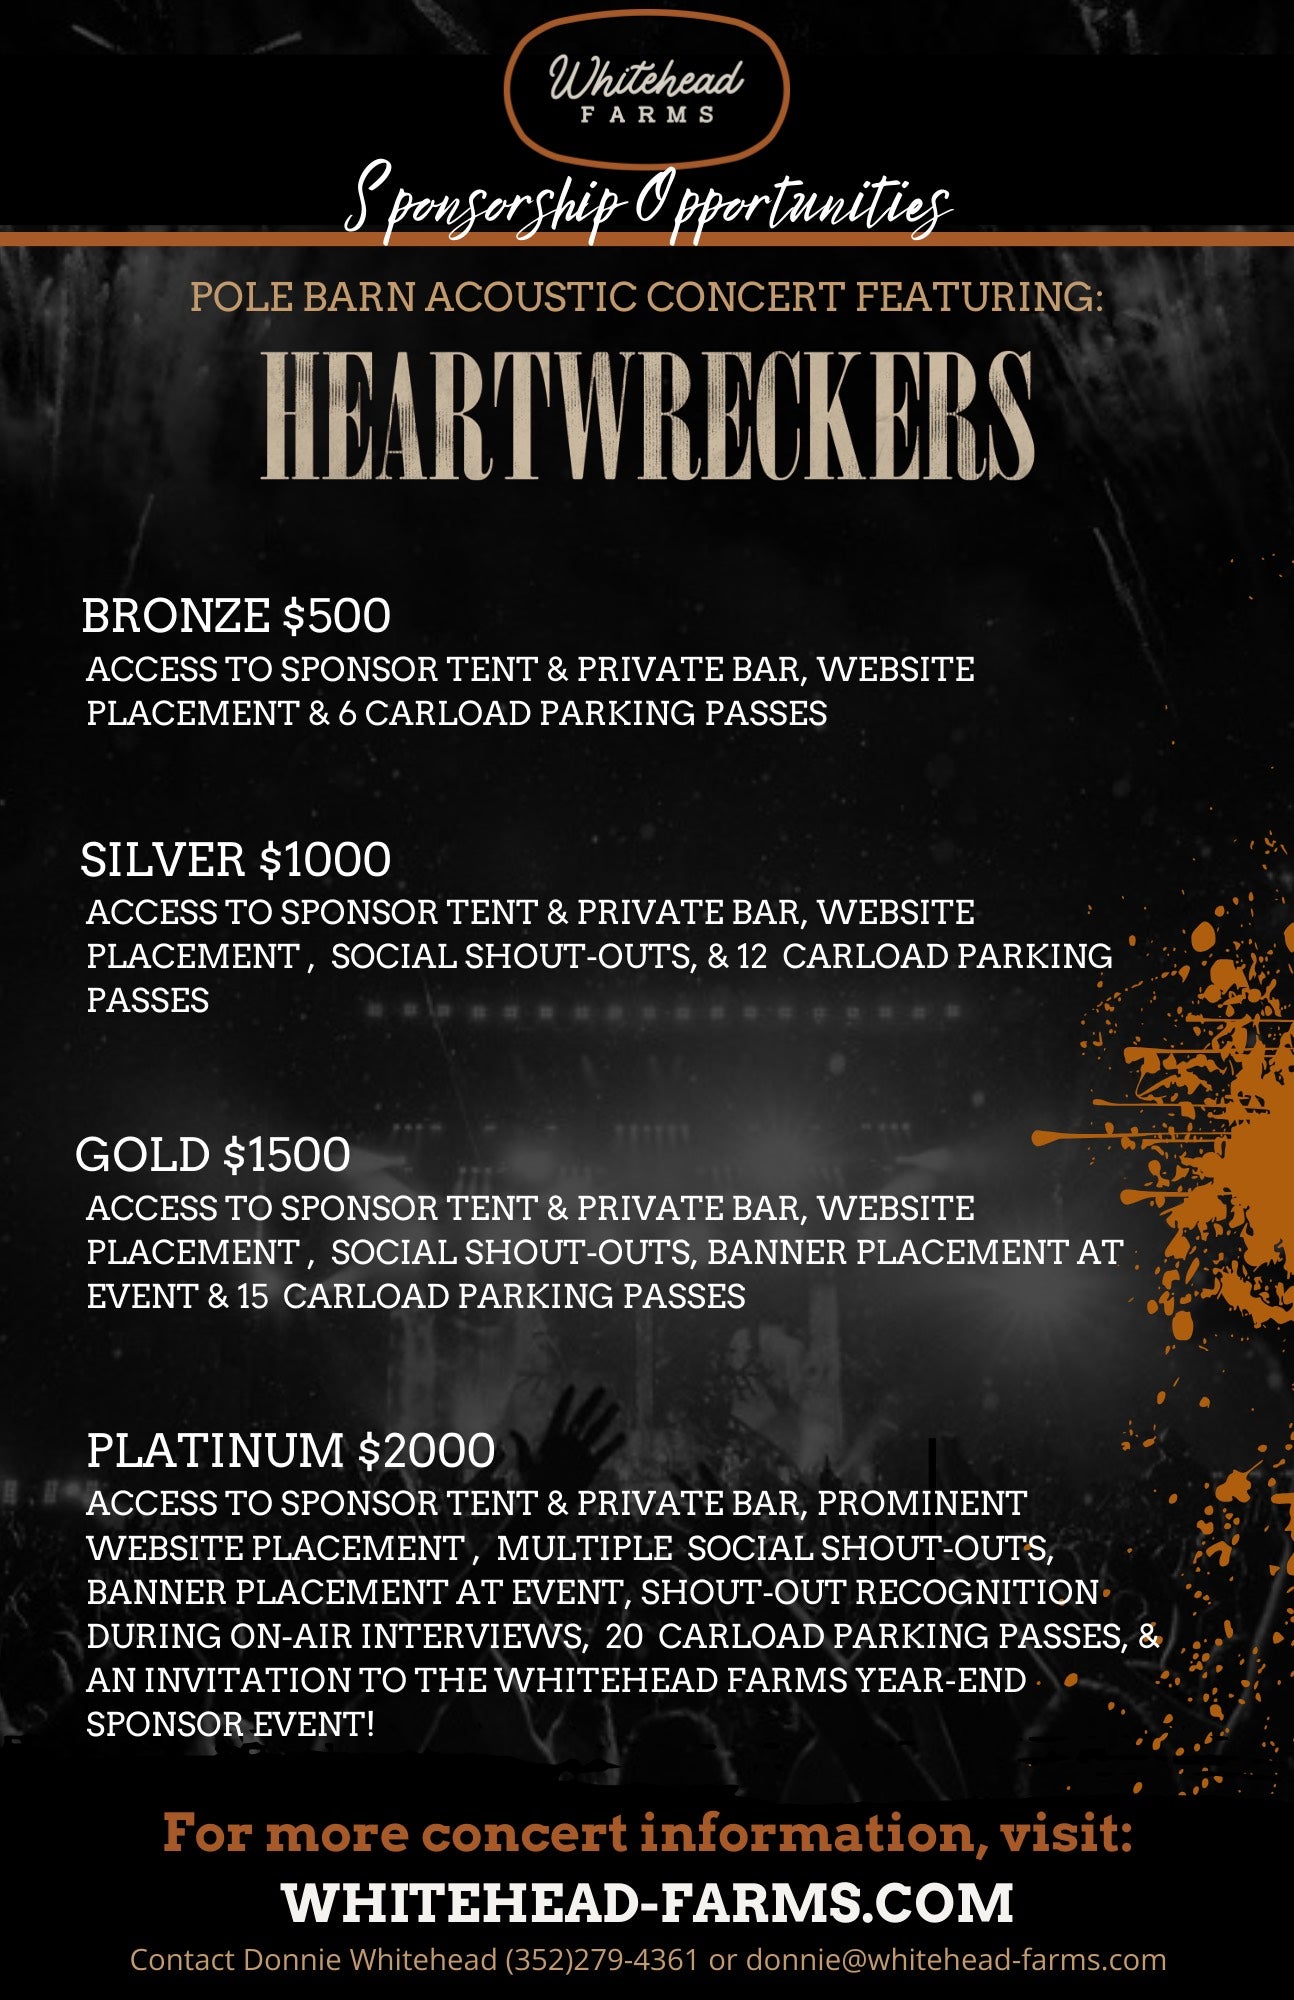 Heartwreckers at the Farm Sponsorship Packages